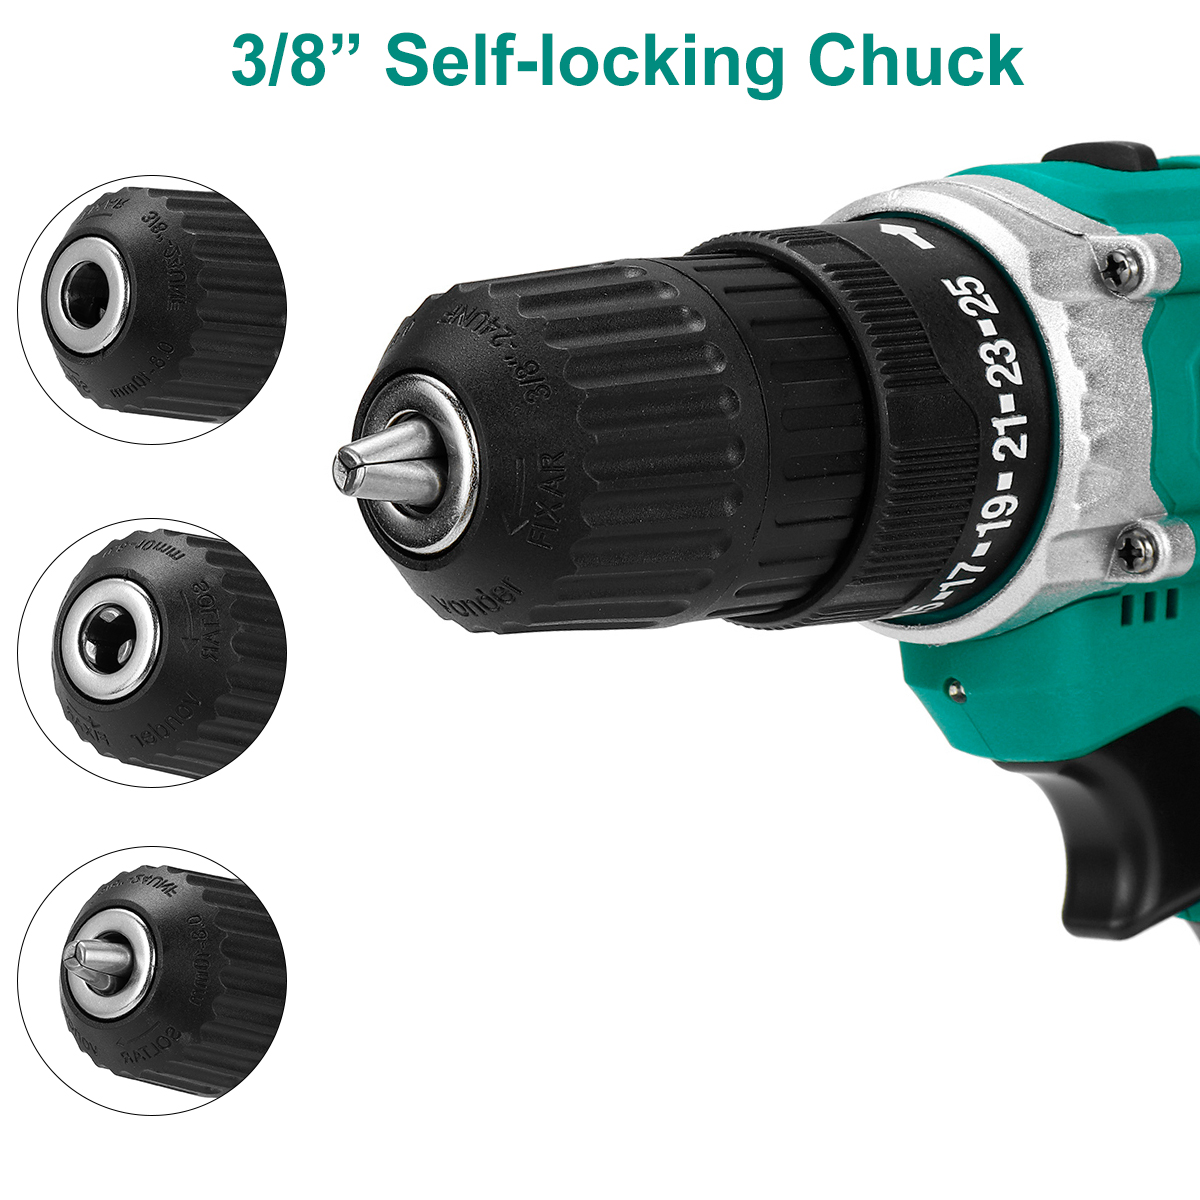 Multifunctional-3In1-Cordless-Electric-Screw-Driver-Drill-Wrench-38-Inch-Chuck-Rechargeable-Impact-D-1837415-7